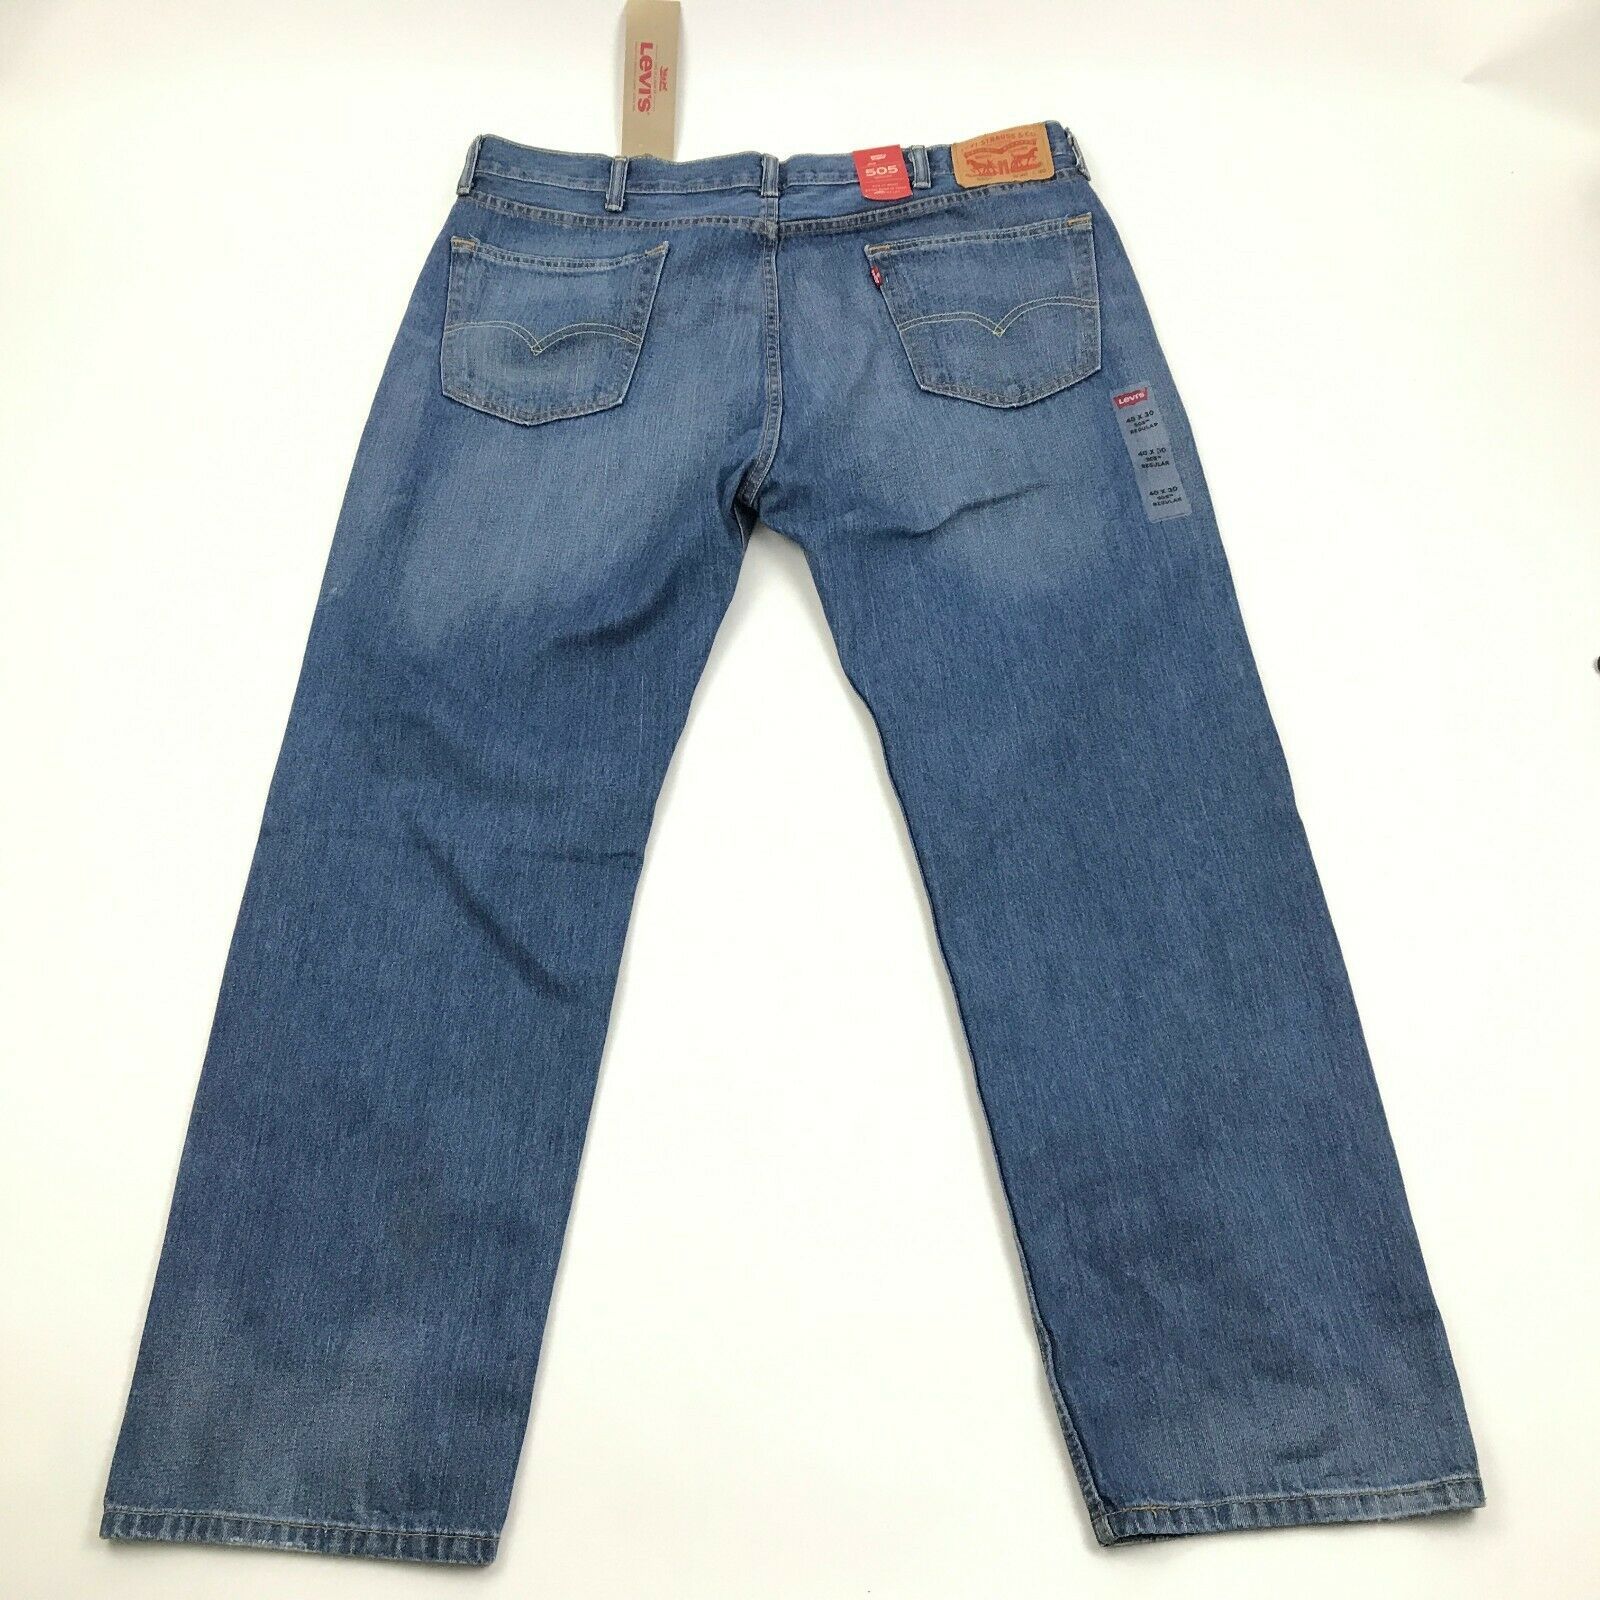 NEW Levis 505 Jeans Mens Size 40x30 Straight Leg Fit Relaxed fit Stone ...